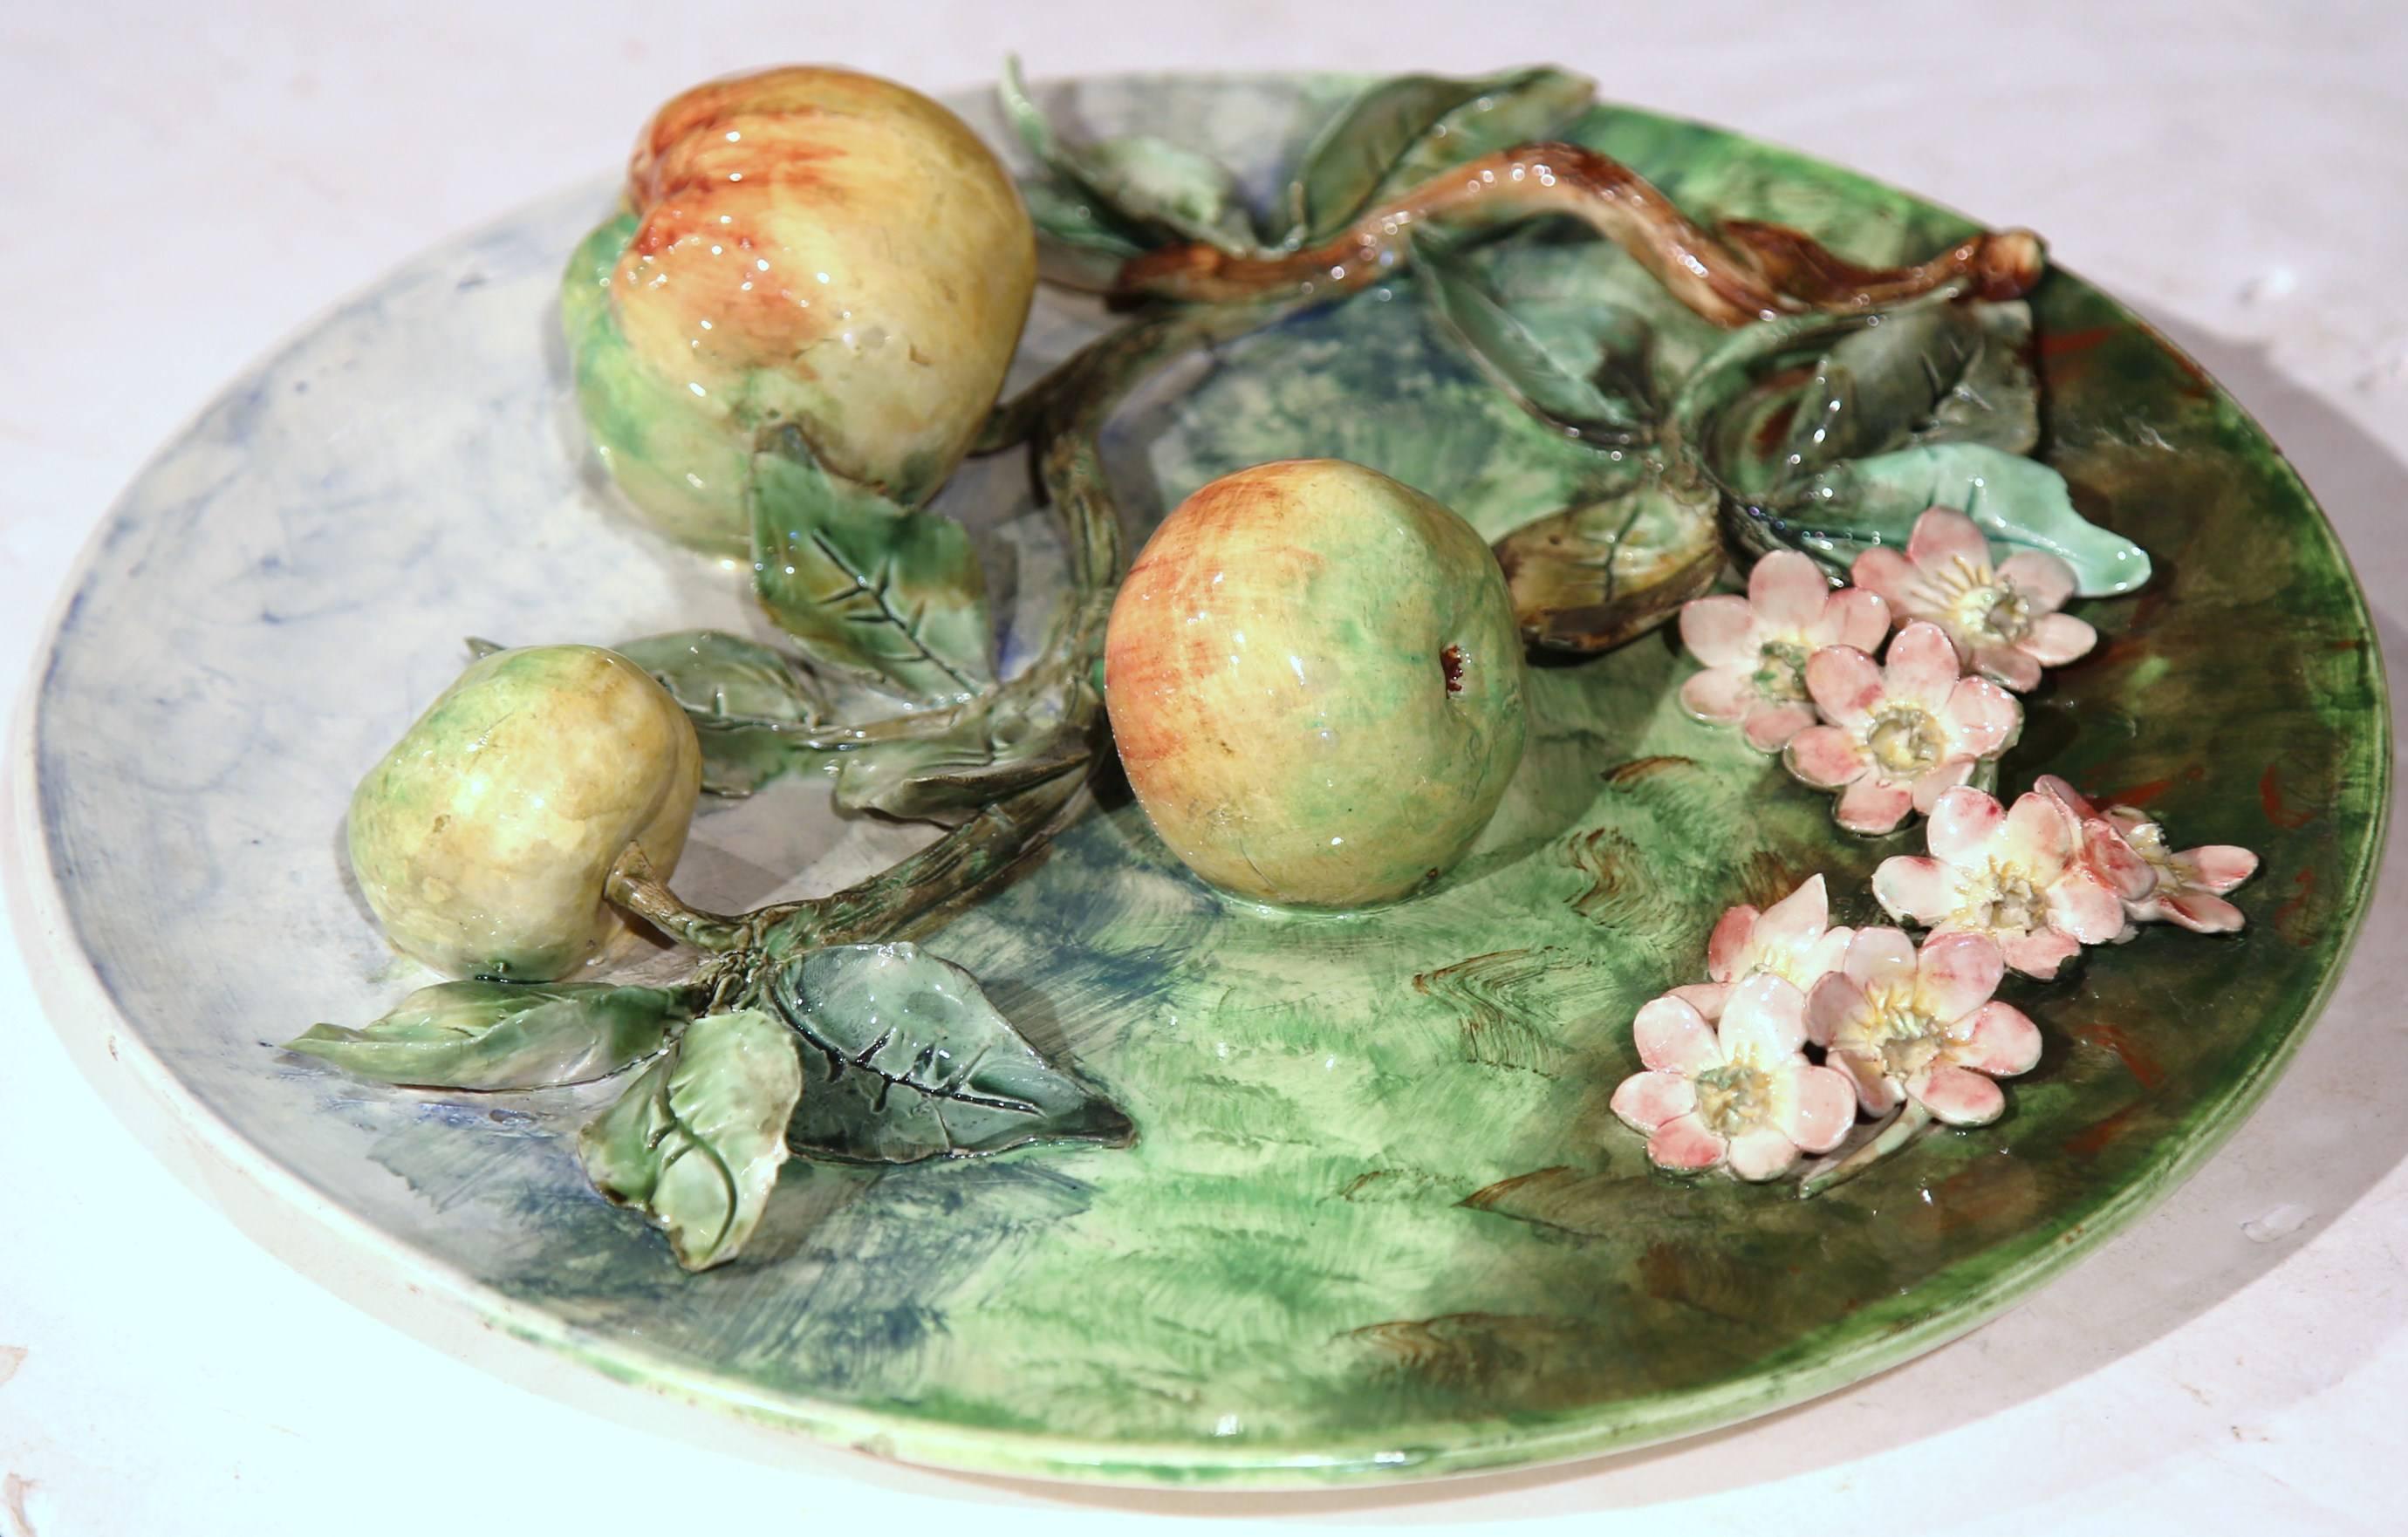 Faience 19th Century French Barbotine Ceramic Wall Platter with Apples Signed Longchamp